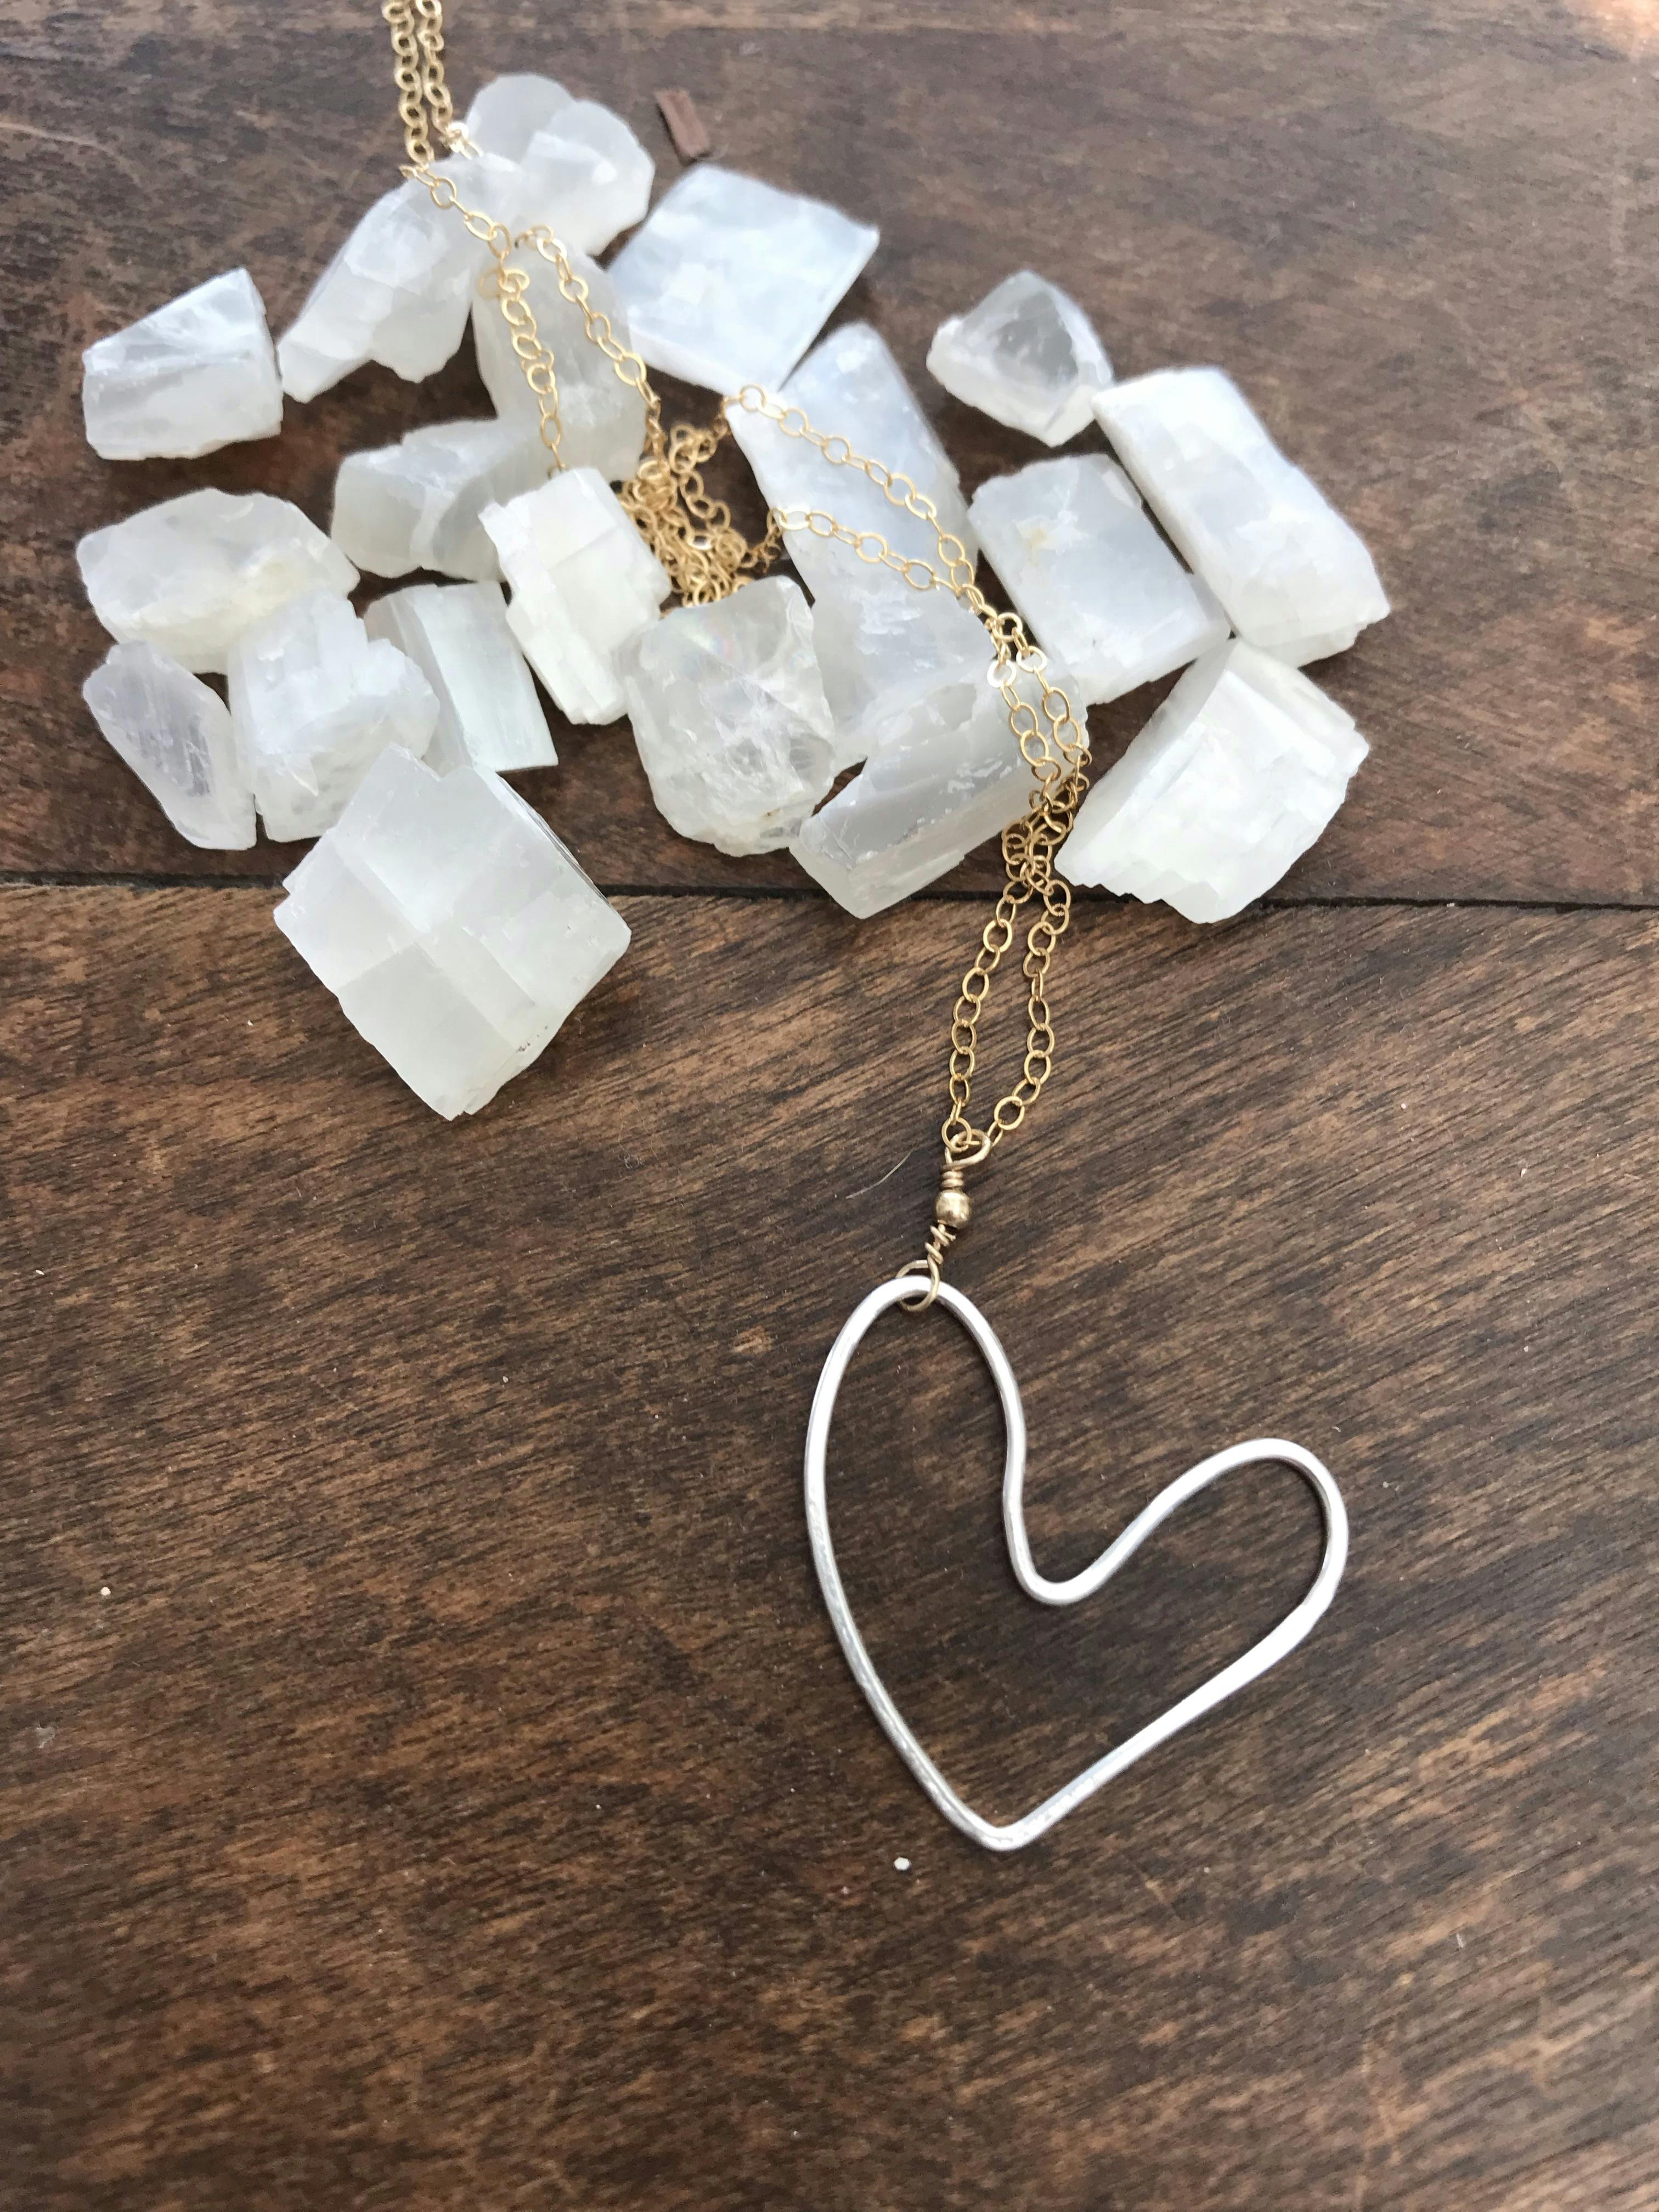 Large hand formed heart necklace 